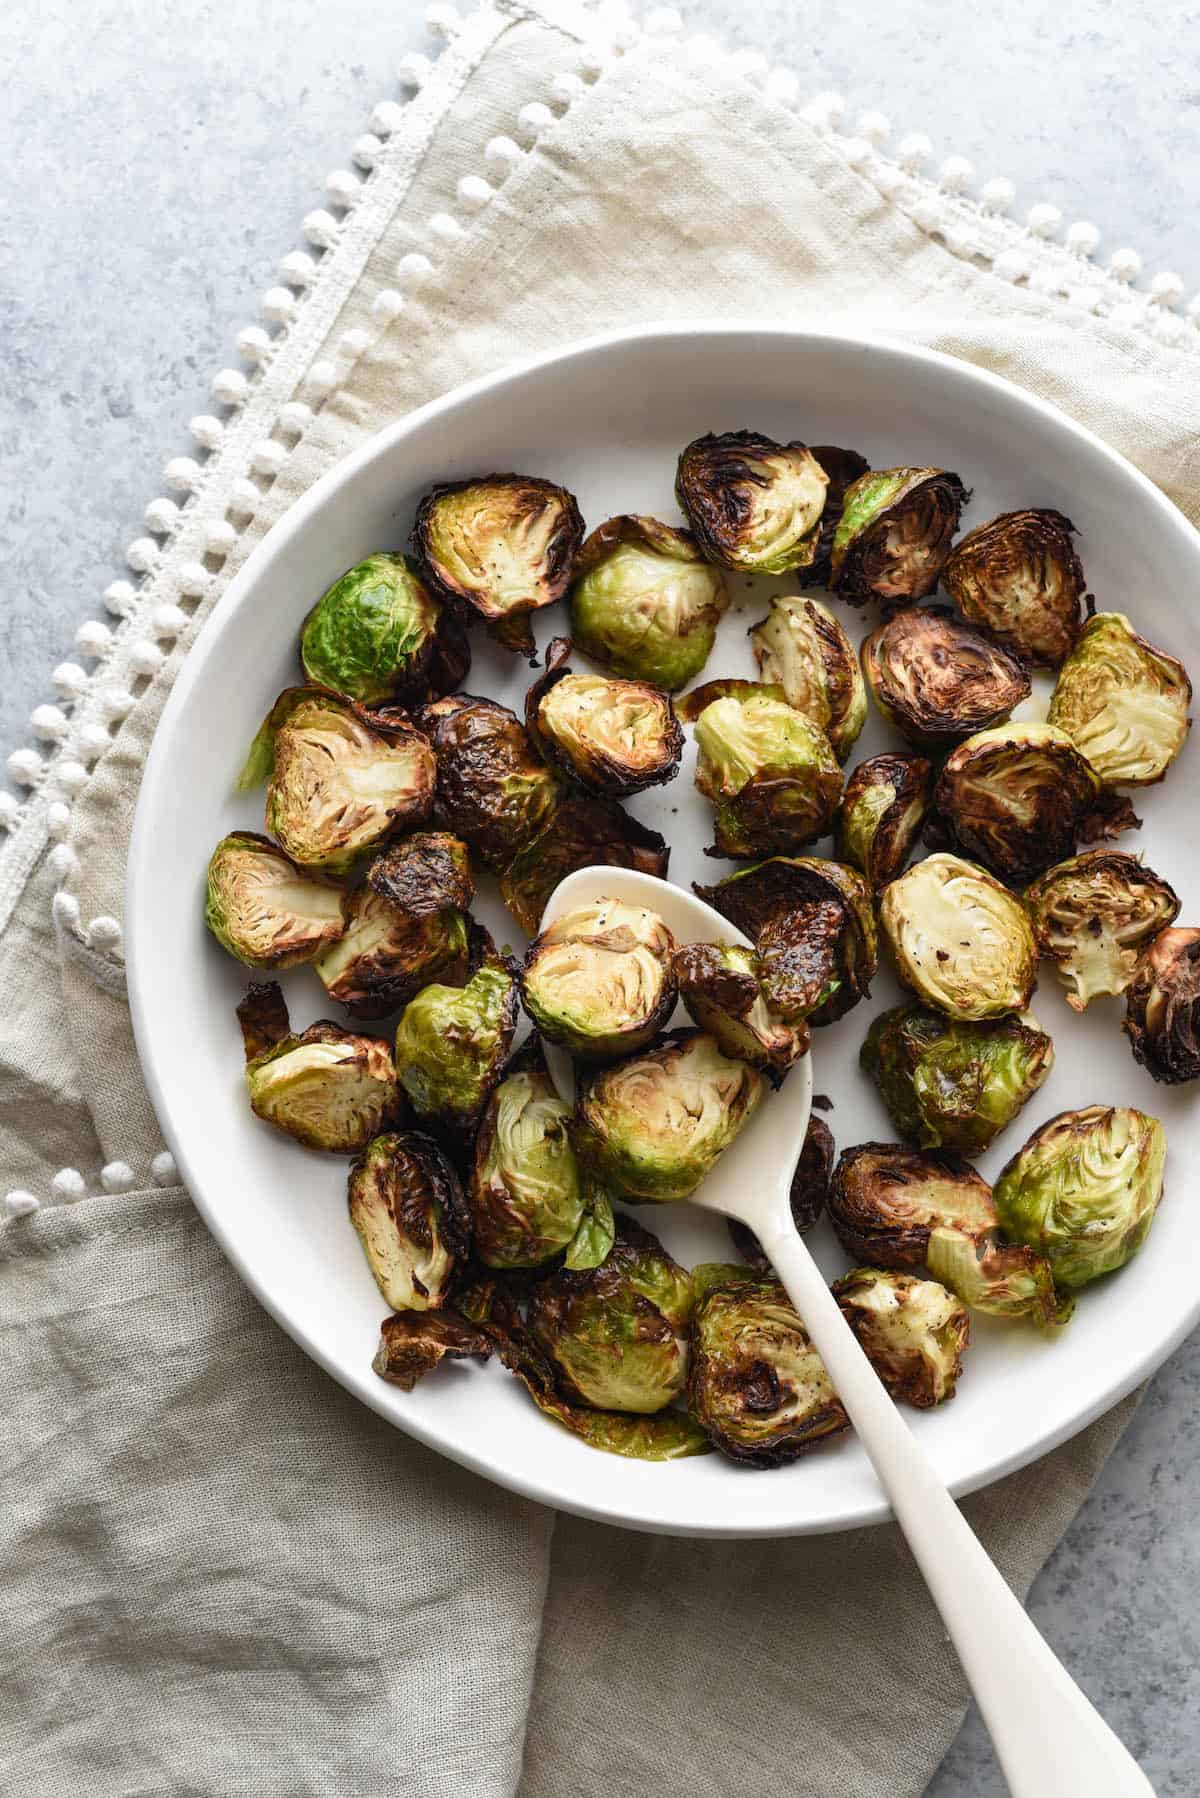 Air fried brussels sprouts in shallow white bowl with white serving spoon, on top of beige linen with pom pom edging.